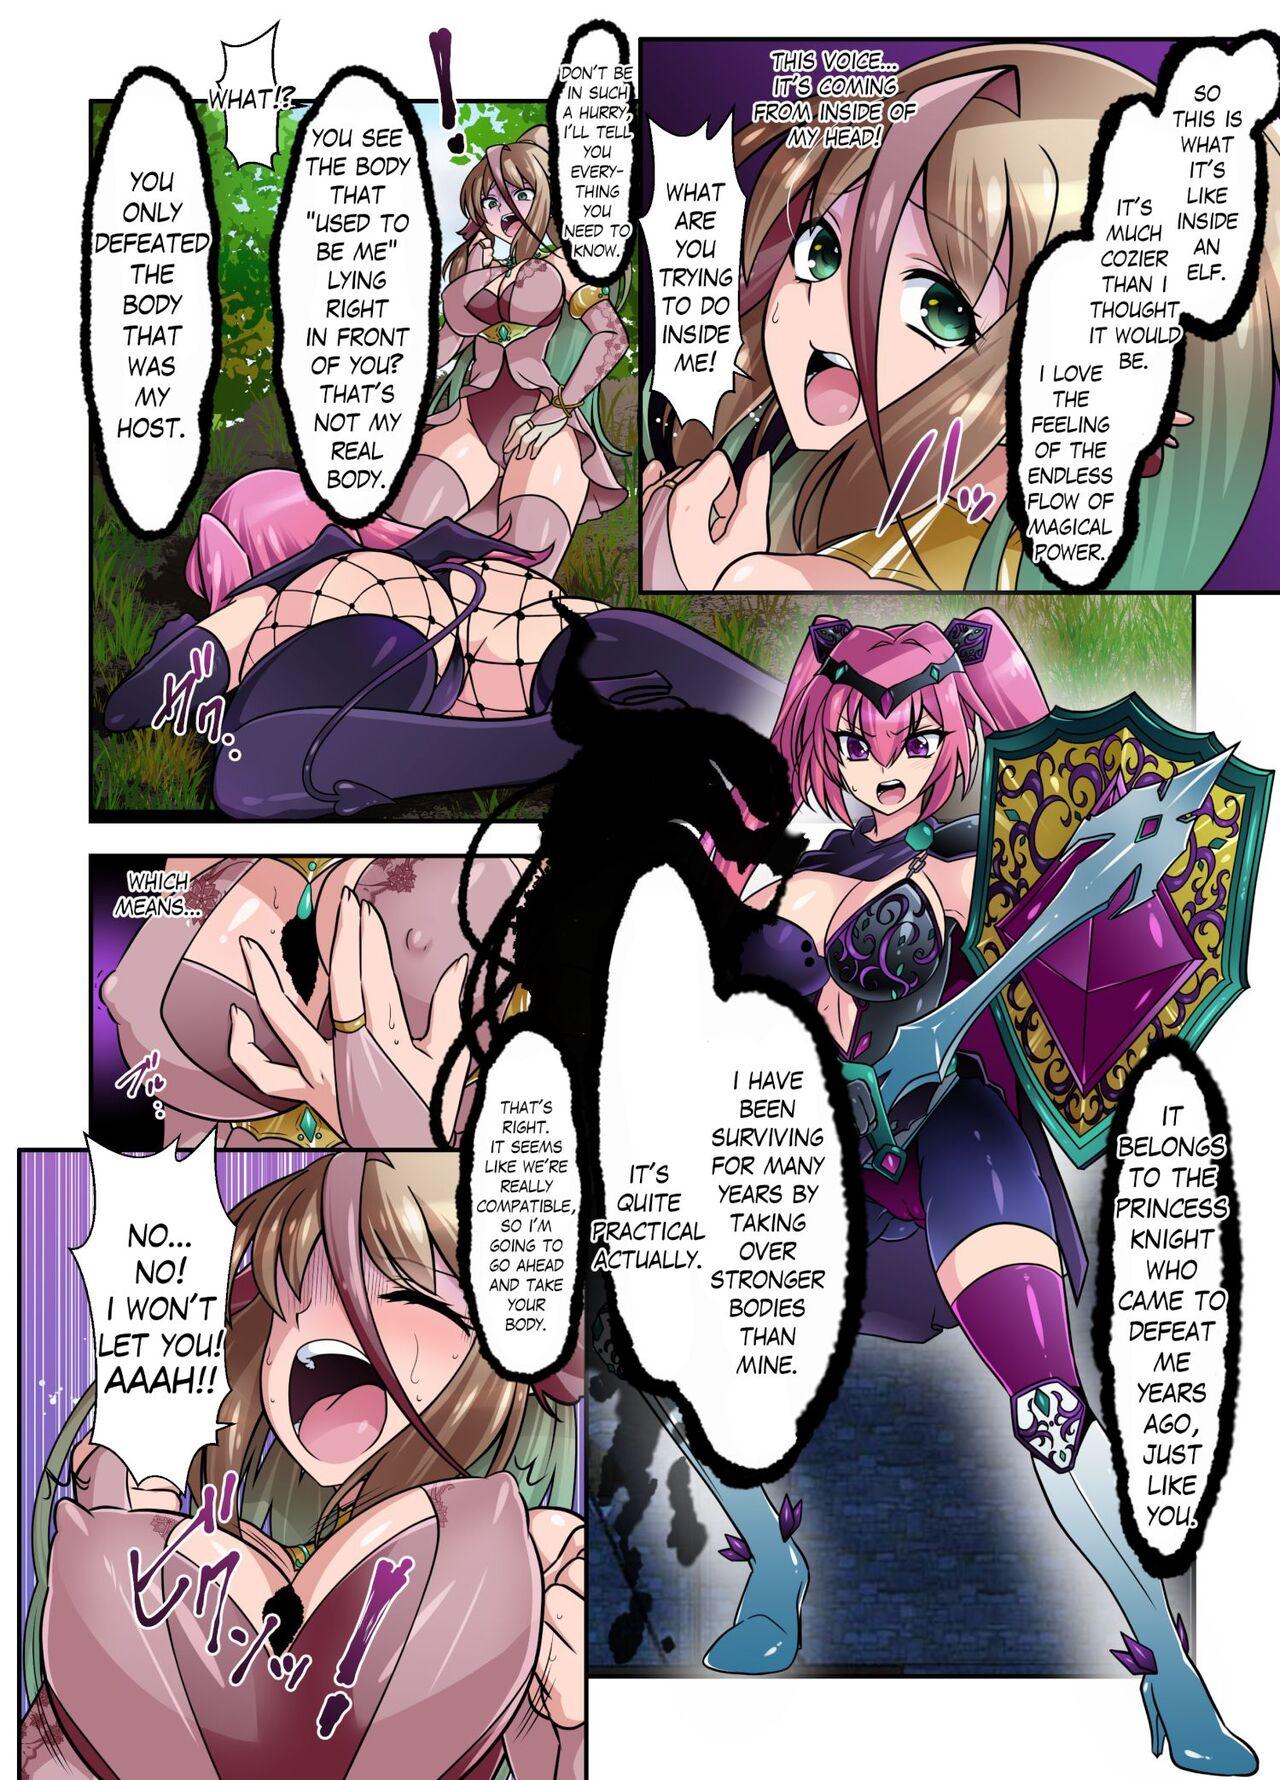 Mujer Elf Taken Over By Succubus Action - Page 3